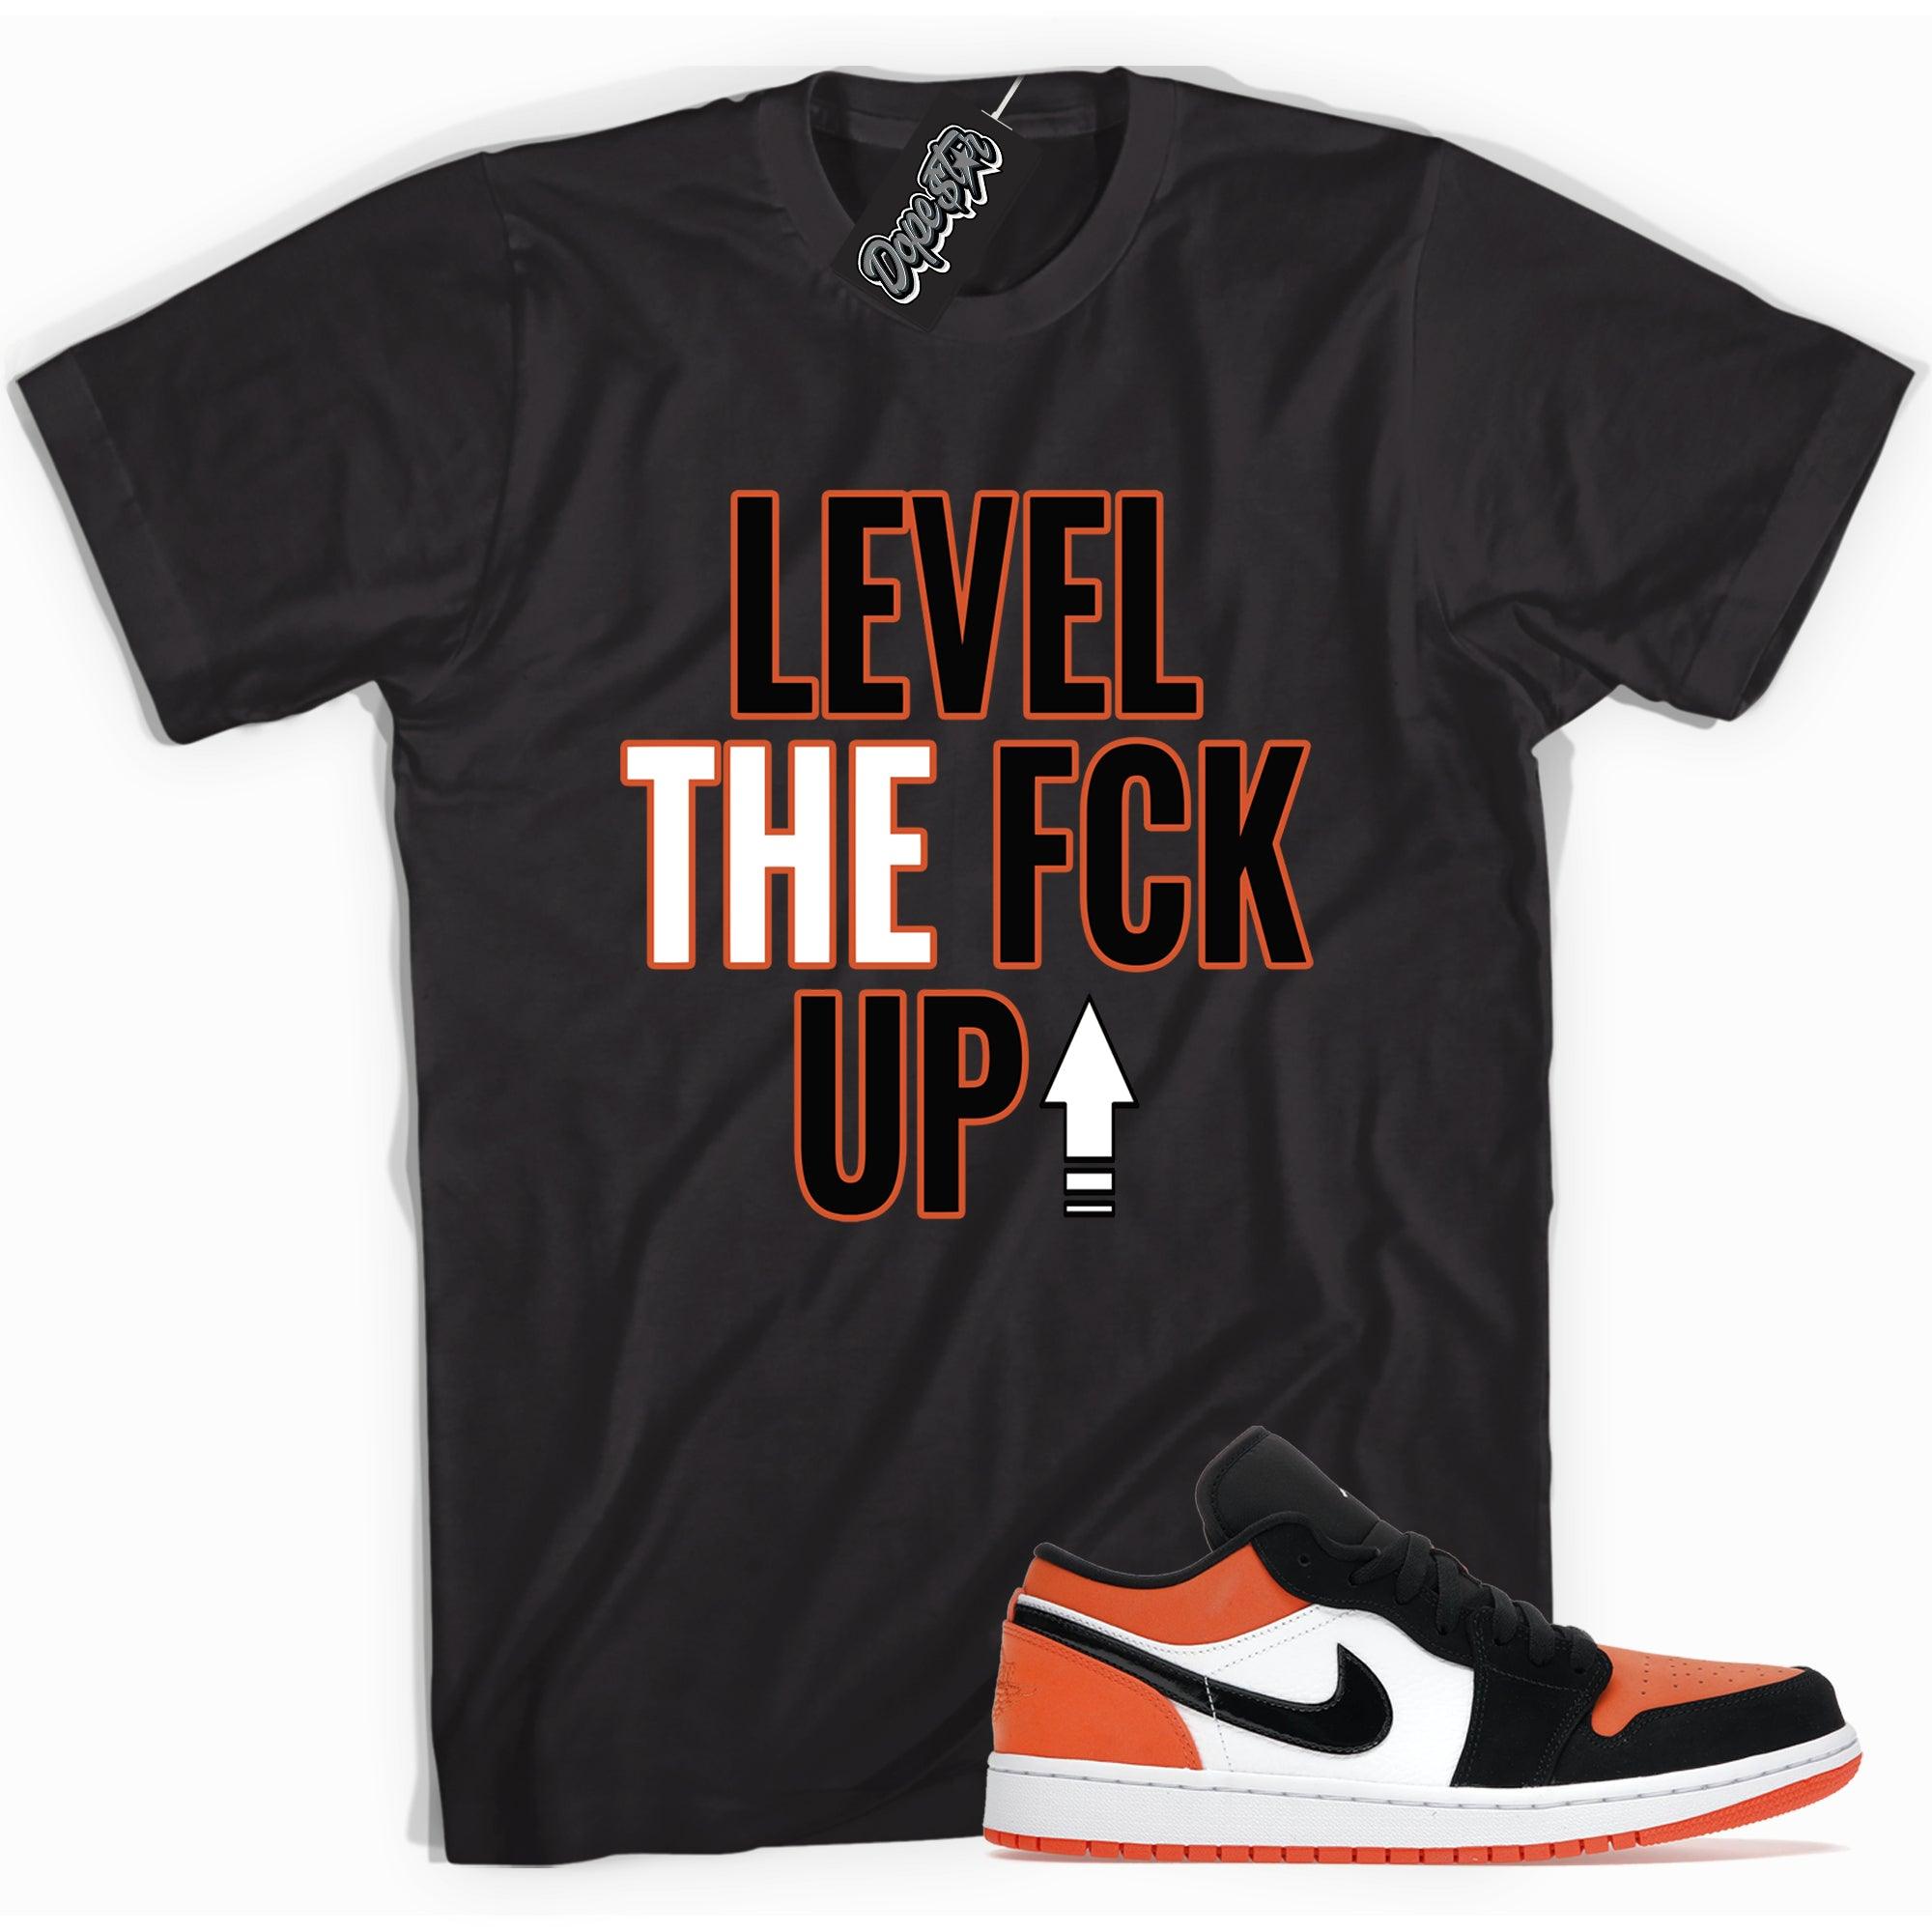 Cool black graphic tee with 'Level Up' print, that perfectly matches  Air Jordan 1 Retro Low GolF Shattered Backboard sneakers.